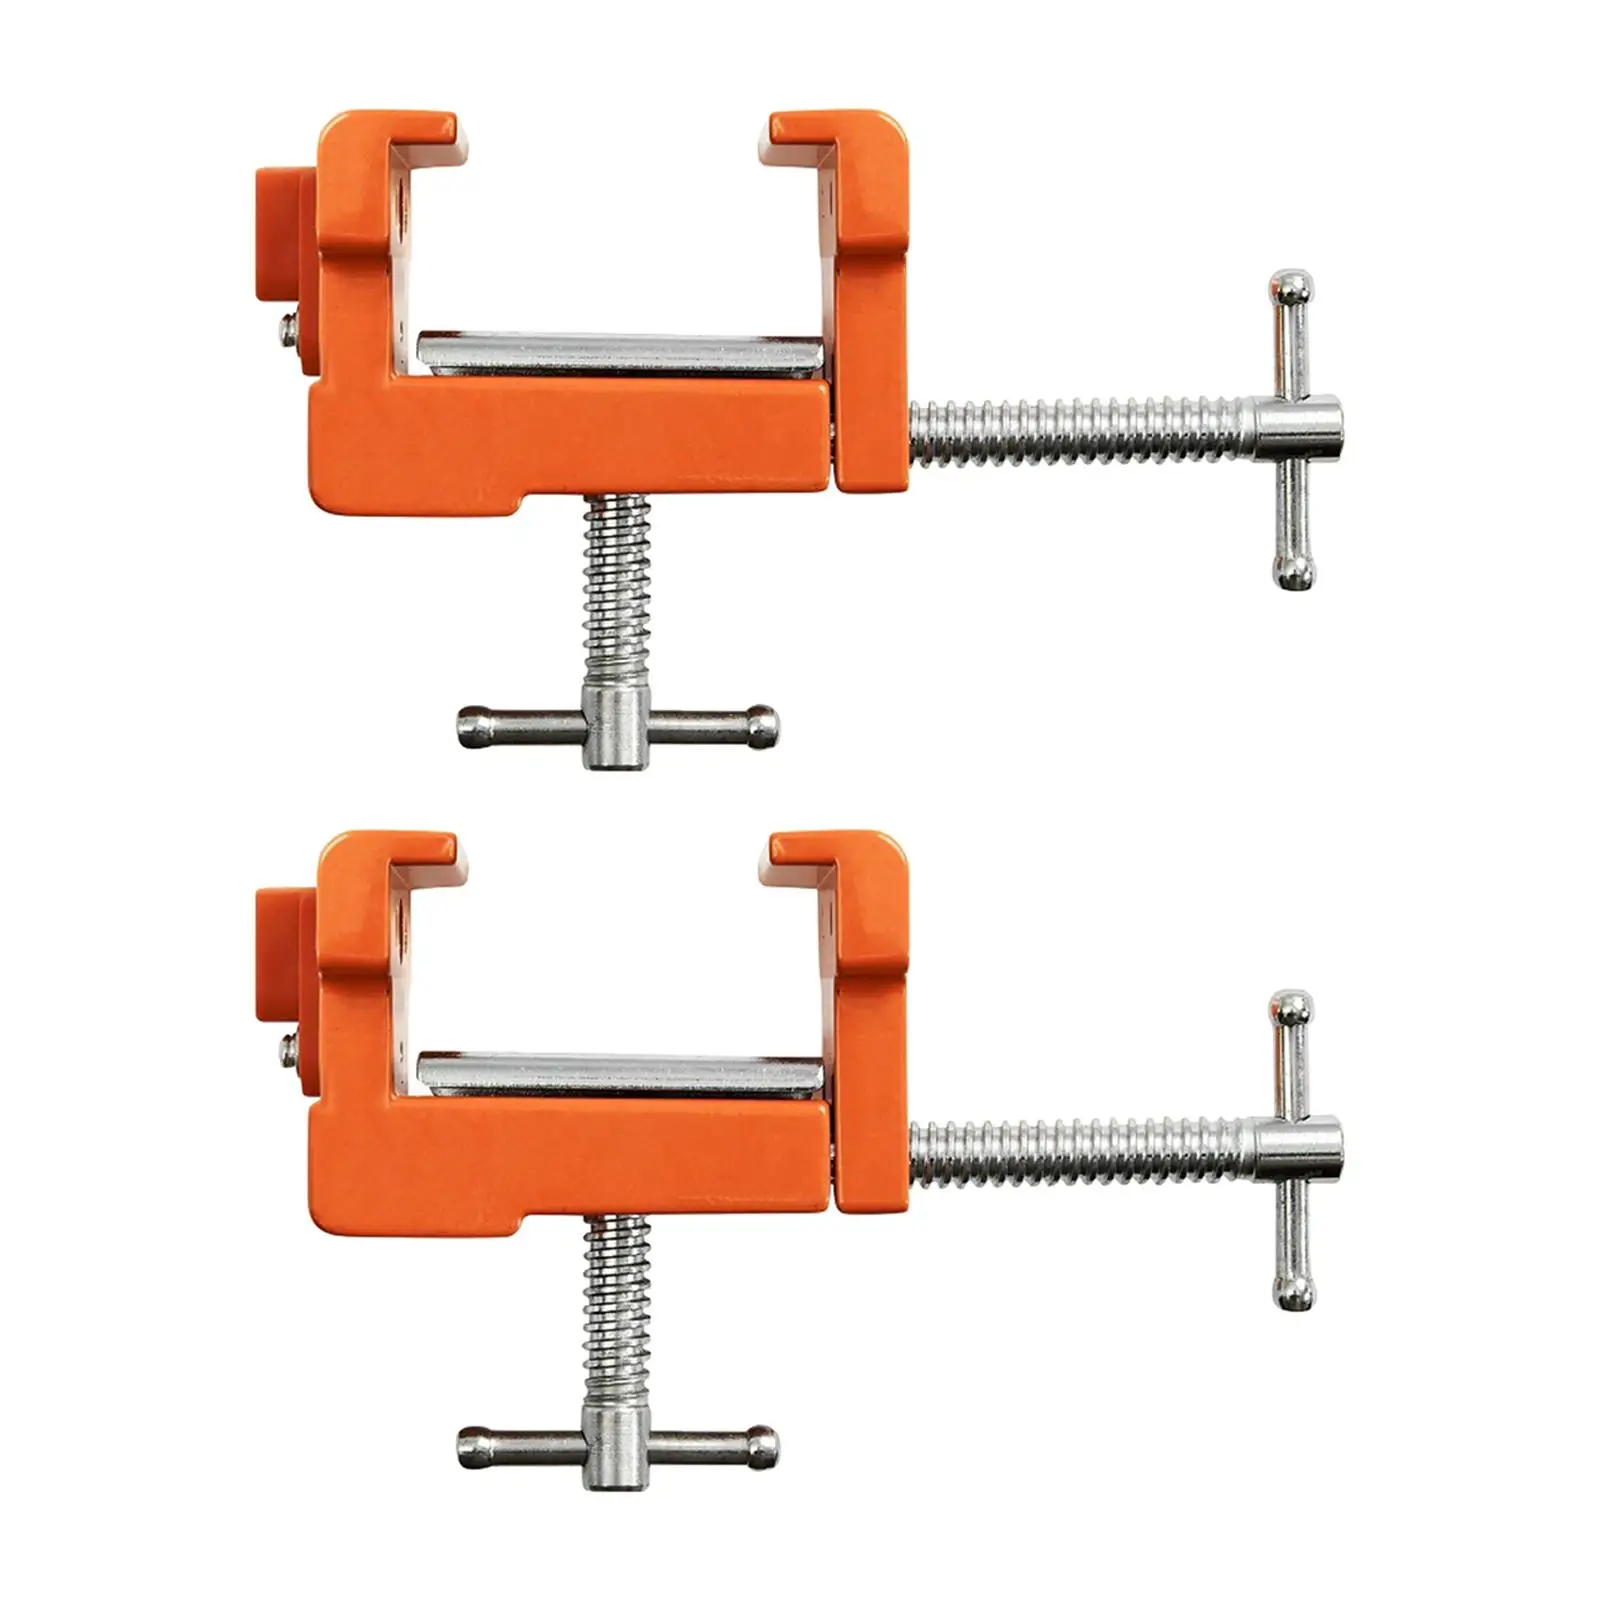 2Pcs Cabinetry Clamps Mounting Craft Repair Professional Woodworking Metal